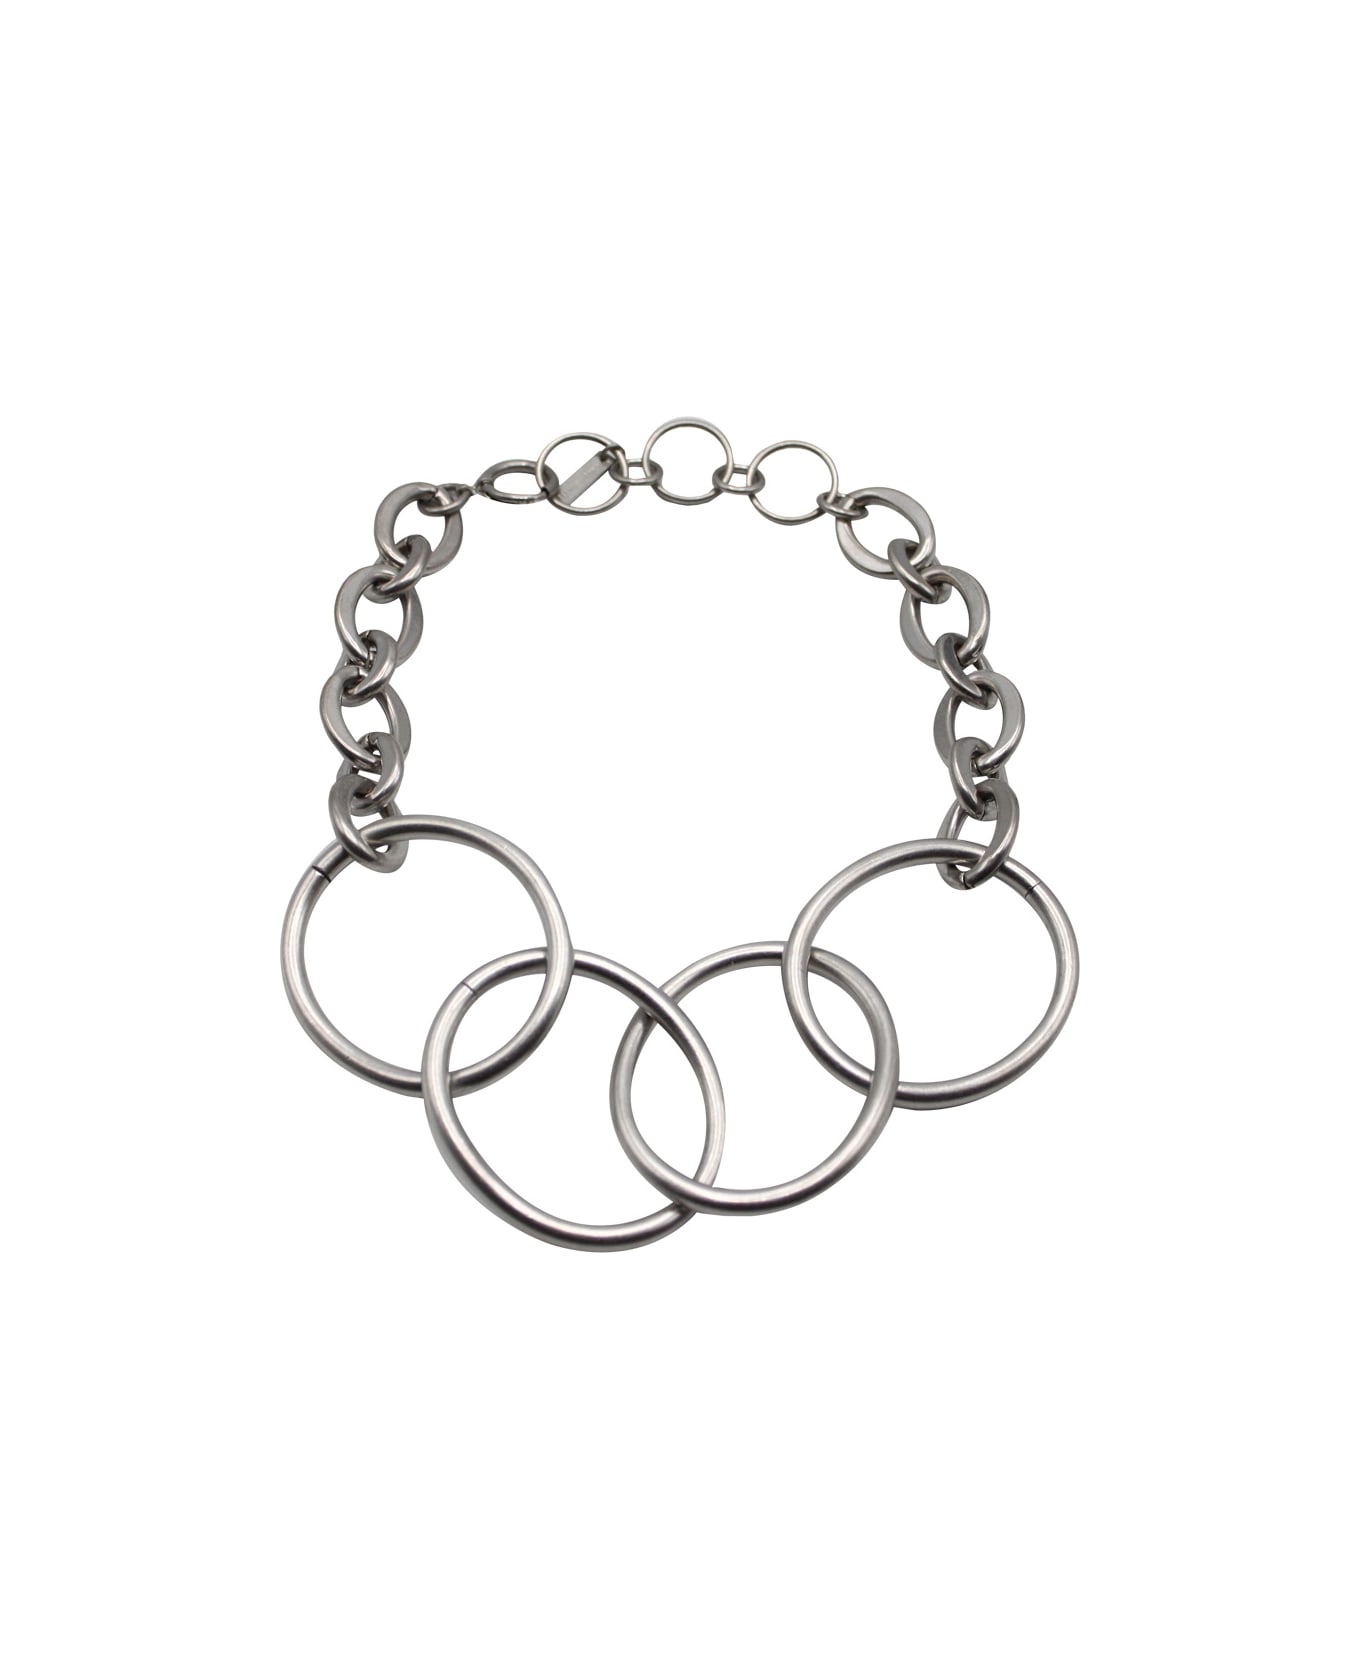 Junya Watanabe Four Ring Chain Link Necklace - Silver ネックレス